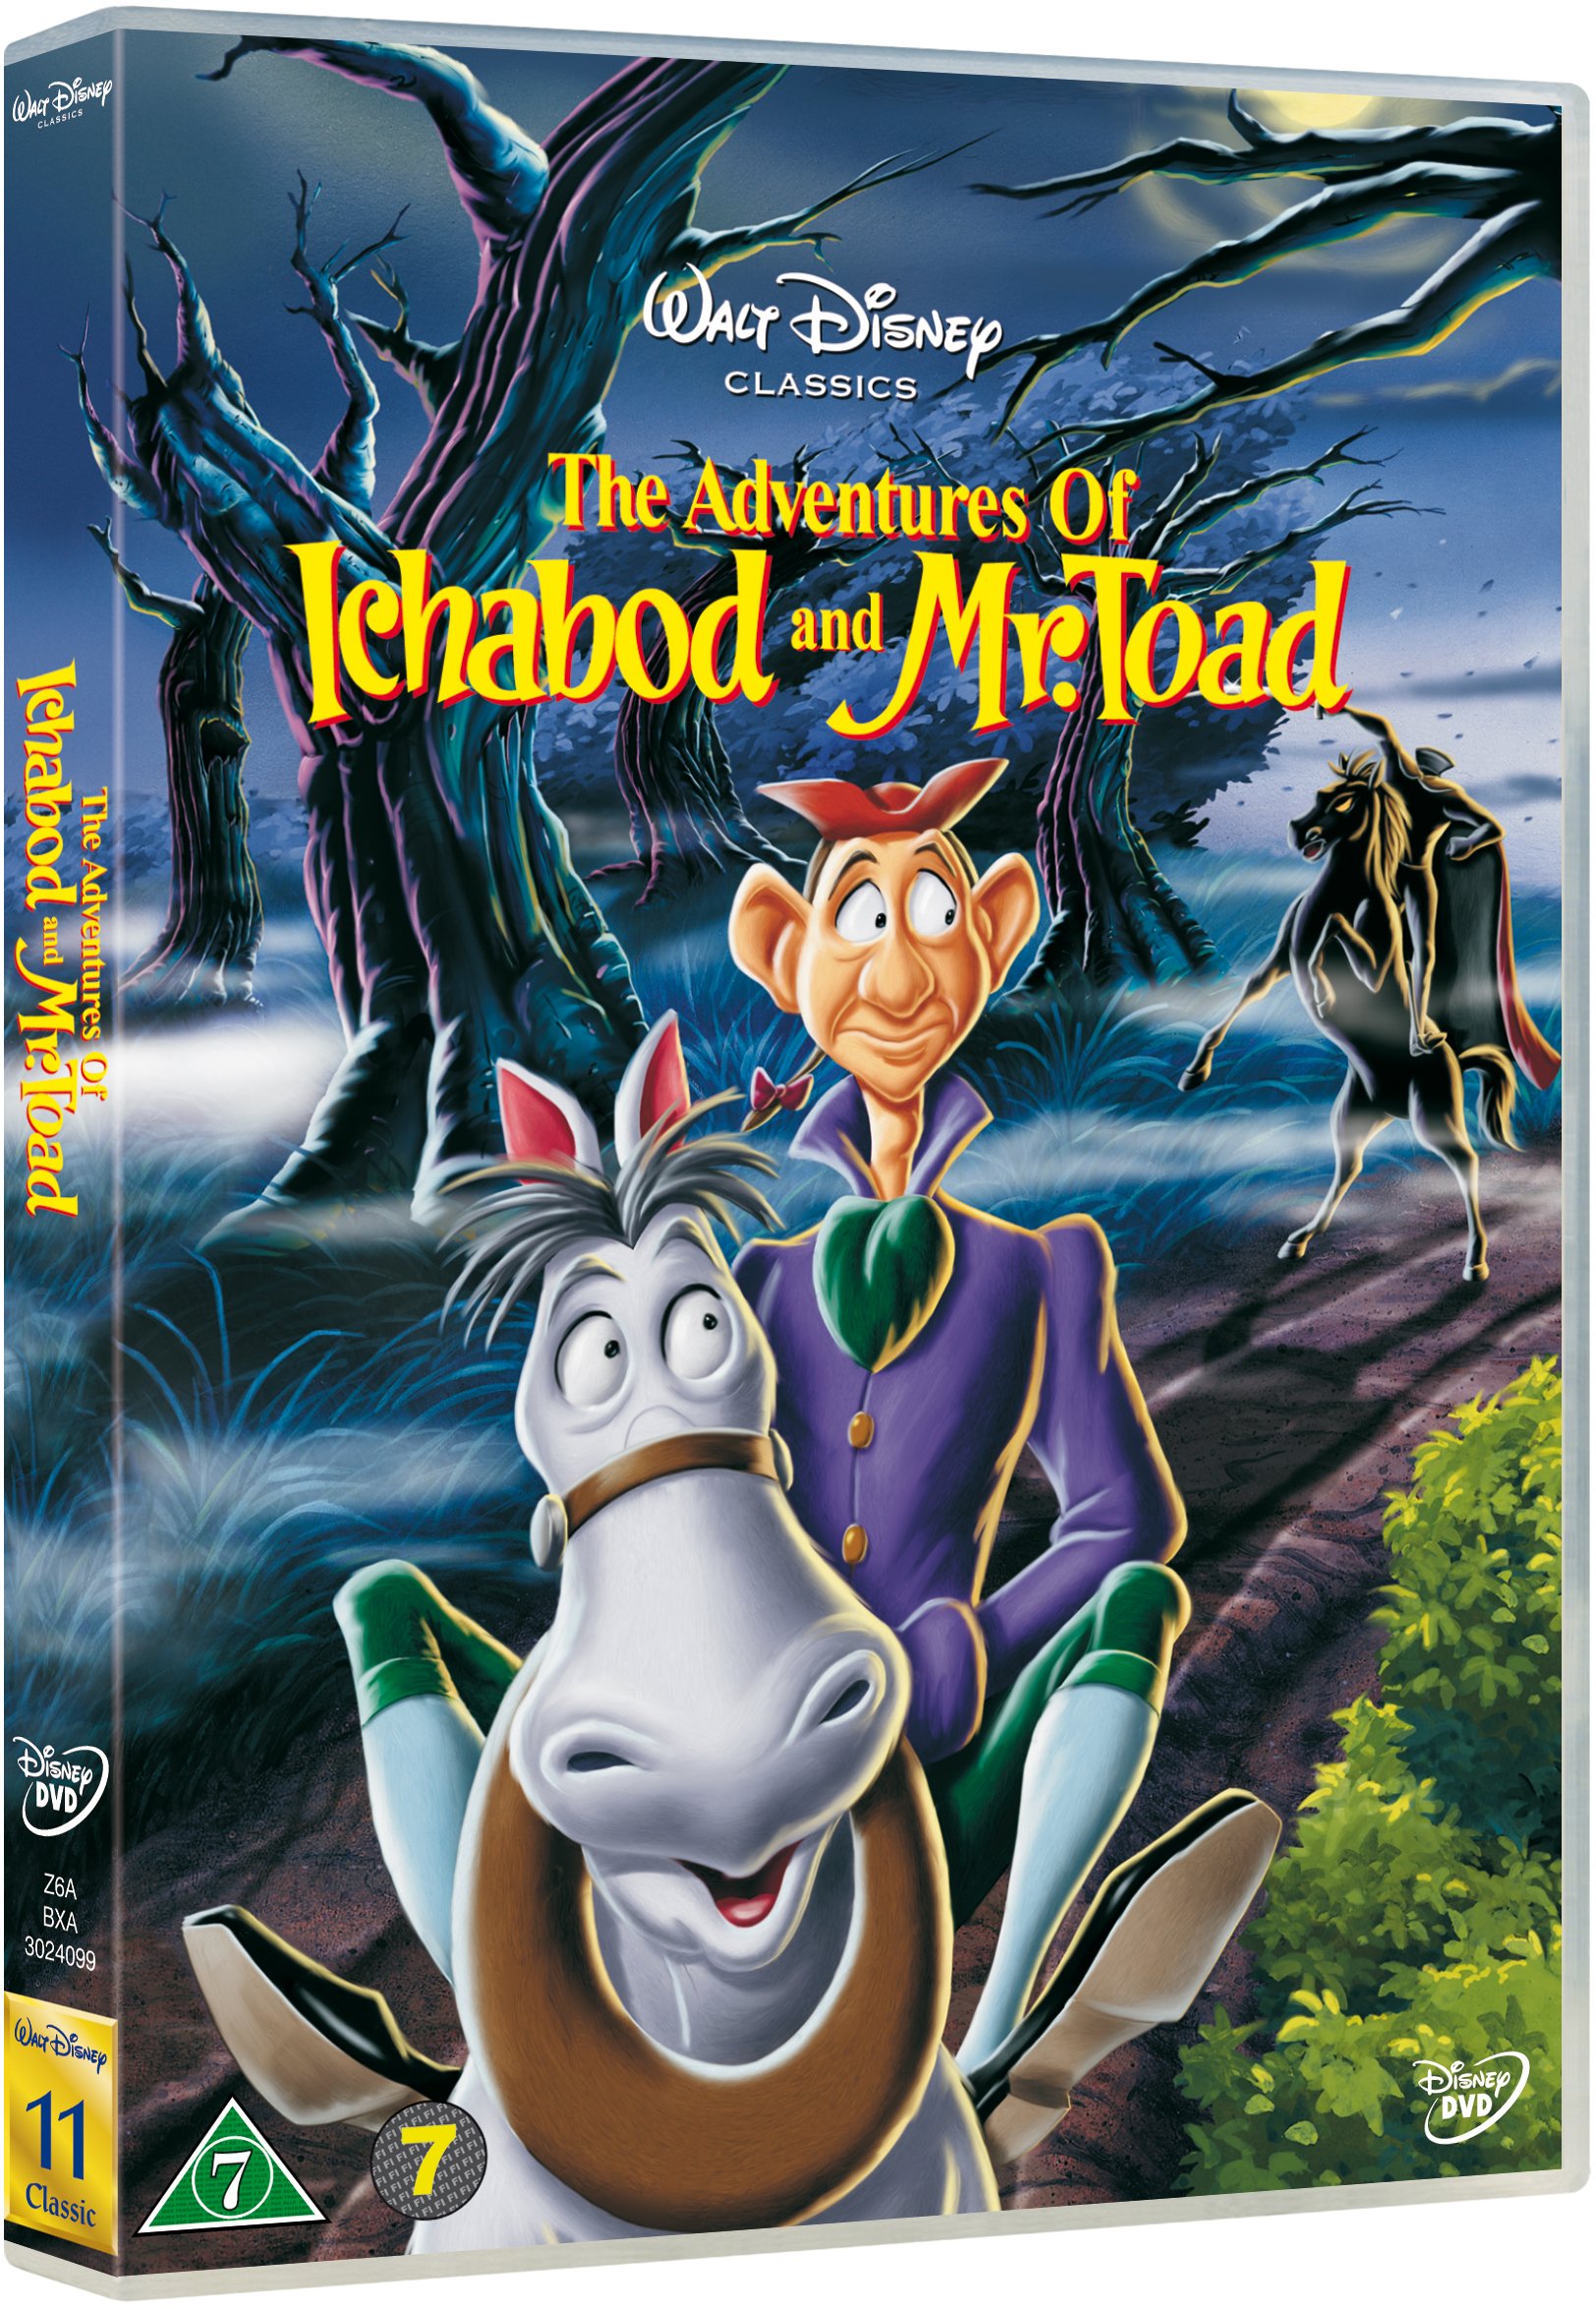 Disneys The Adventures Of Ichabod and Mr. Toad - DVD